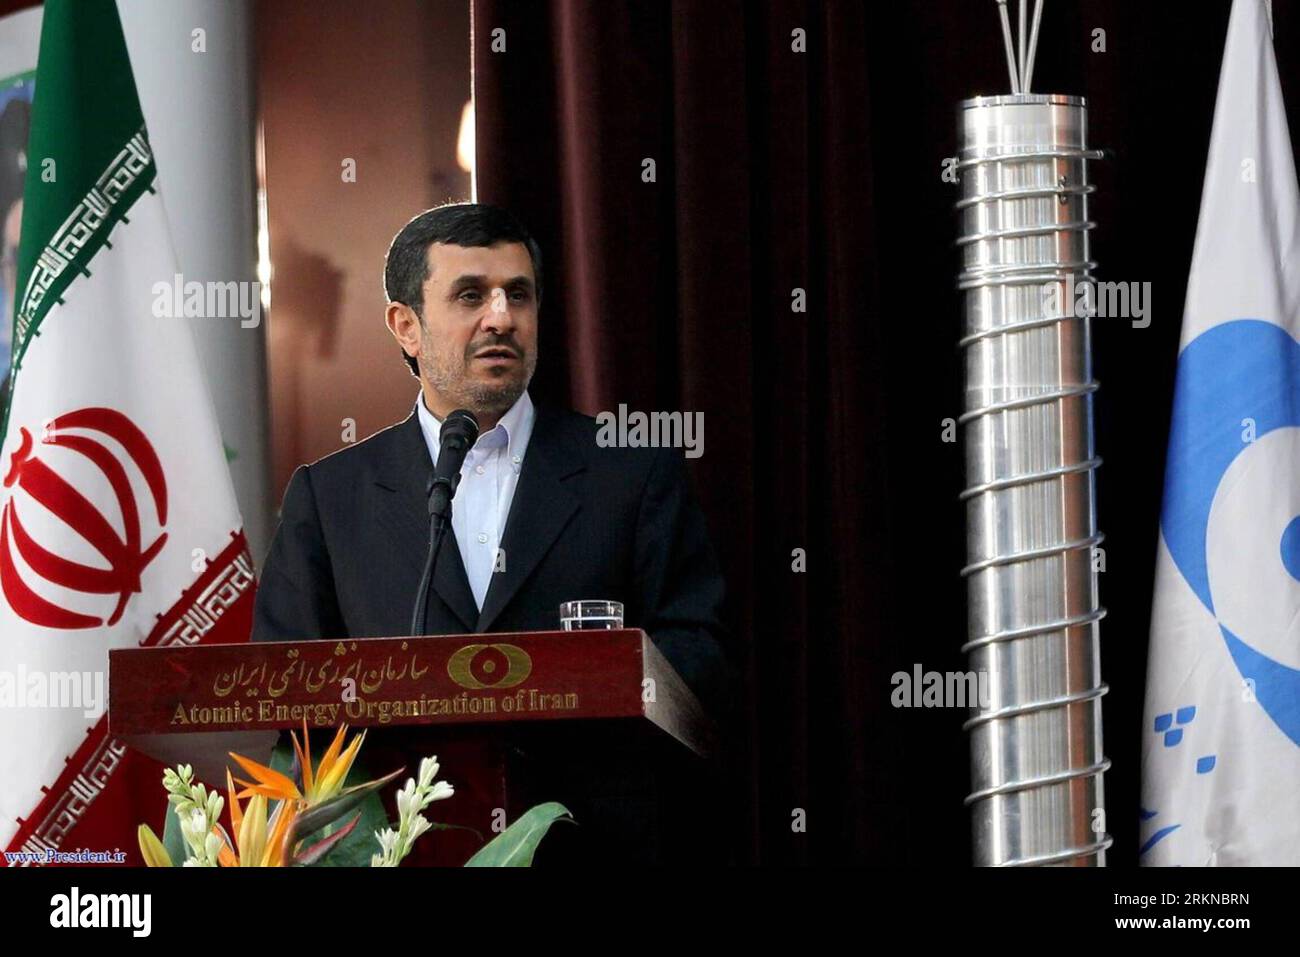 Bildnummer: 57076891  Datum: 15.02.2012  Copyright: imago/Xinhua (120215)-- TEHRAN, Feb. 15, 2012 (Xinhua) -- Iranian President Mahmoud Ahmadinejad speaks during an unveiling ceremony of a new generation of centrifuge for uranium enrichment in Tehran, Iran, Feb. 15, 2012. In the ceremony, Ahmadinejad, symbolically, fed a home-made fuel rod made out of 20-percent enriched uranium into the core of Tehran Research Reactor. (Xinhua/Official Website of the Iranian President) IRAN-TEHRAN-NUCLEAR-AHMADINEJAD PUBLICATIONxNOTxINxCHN People Politik AKW Zentrifuge Nukleartechnik Atomprogramm Atomstreit p Stock Photo